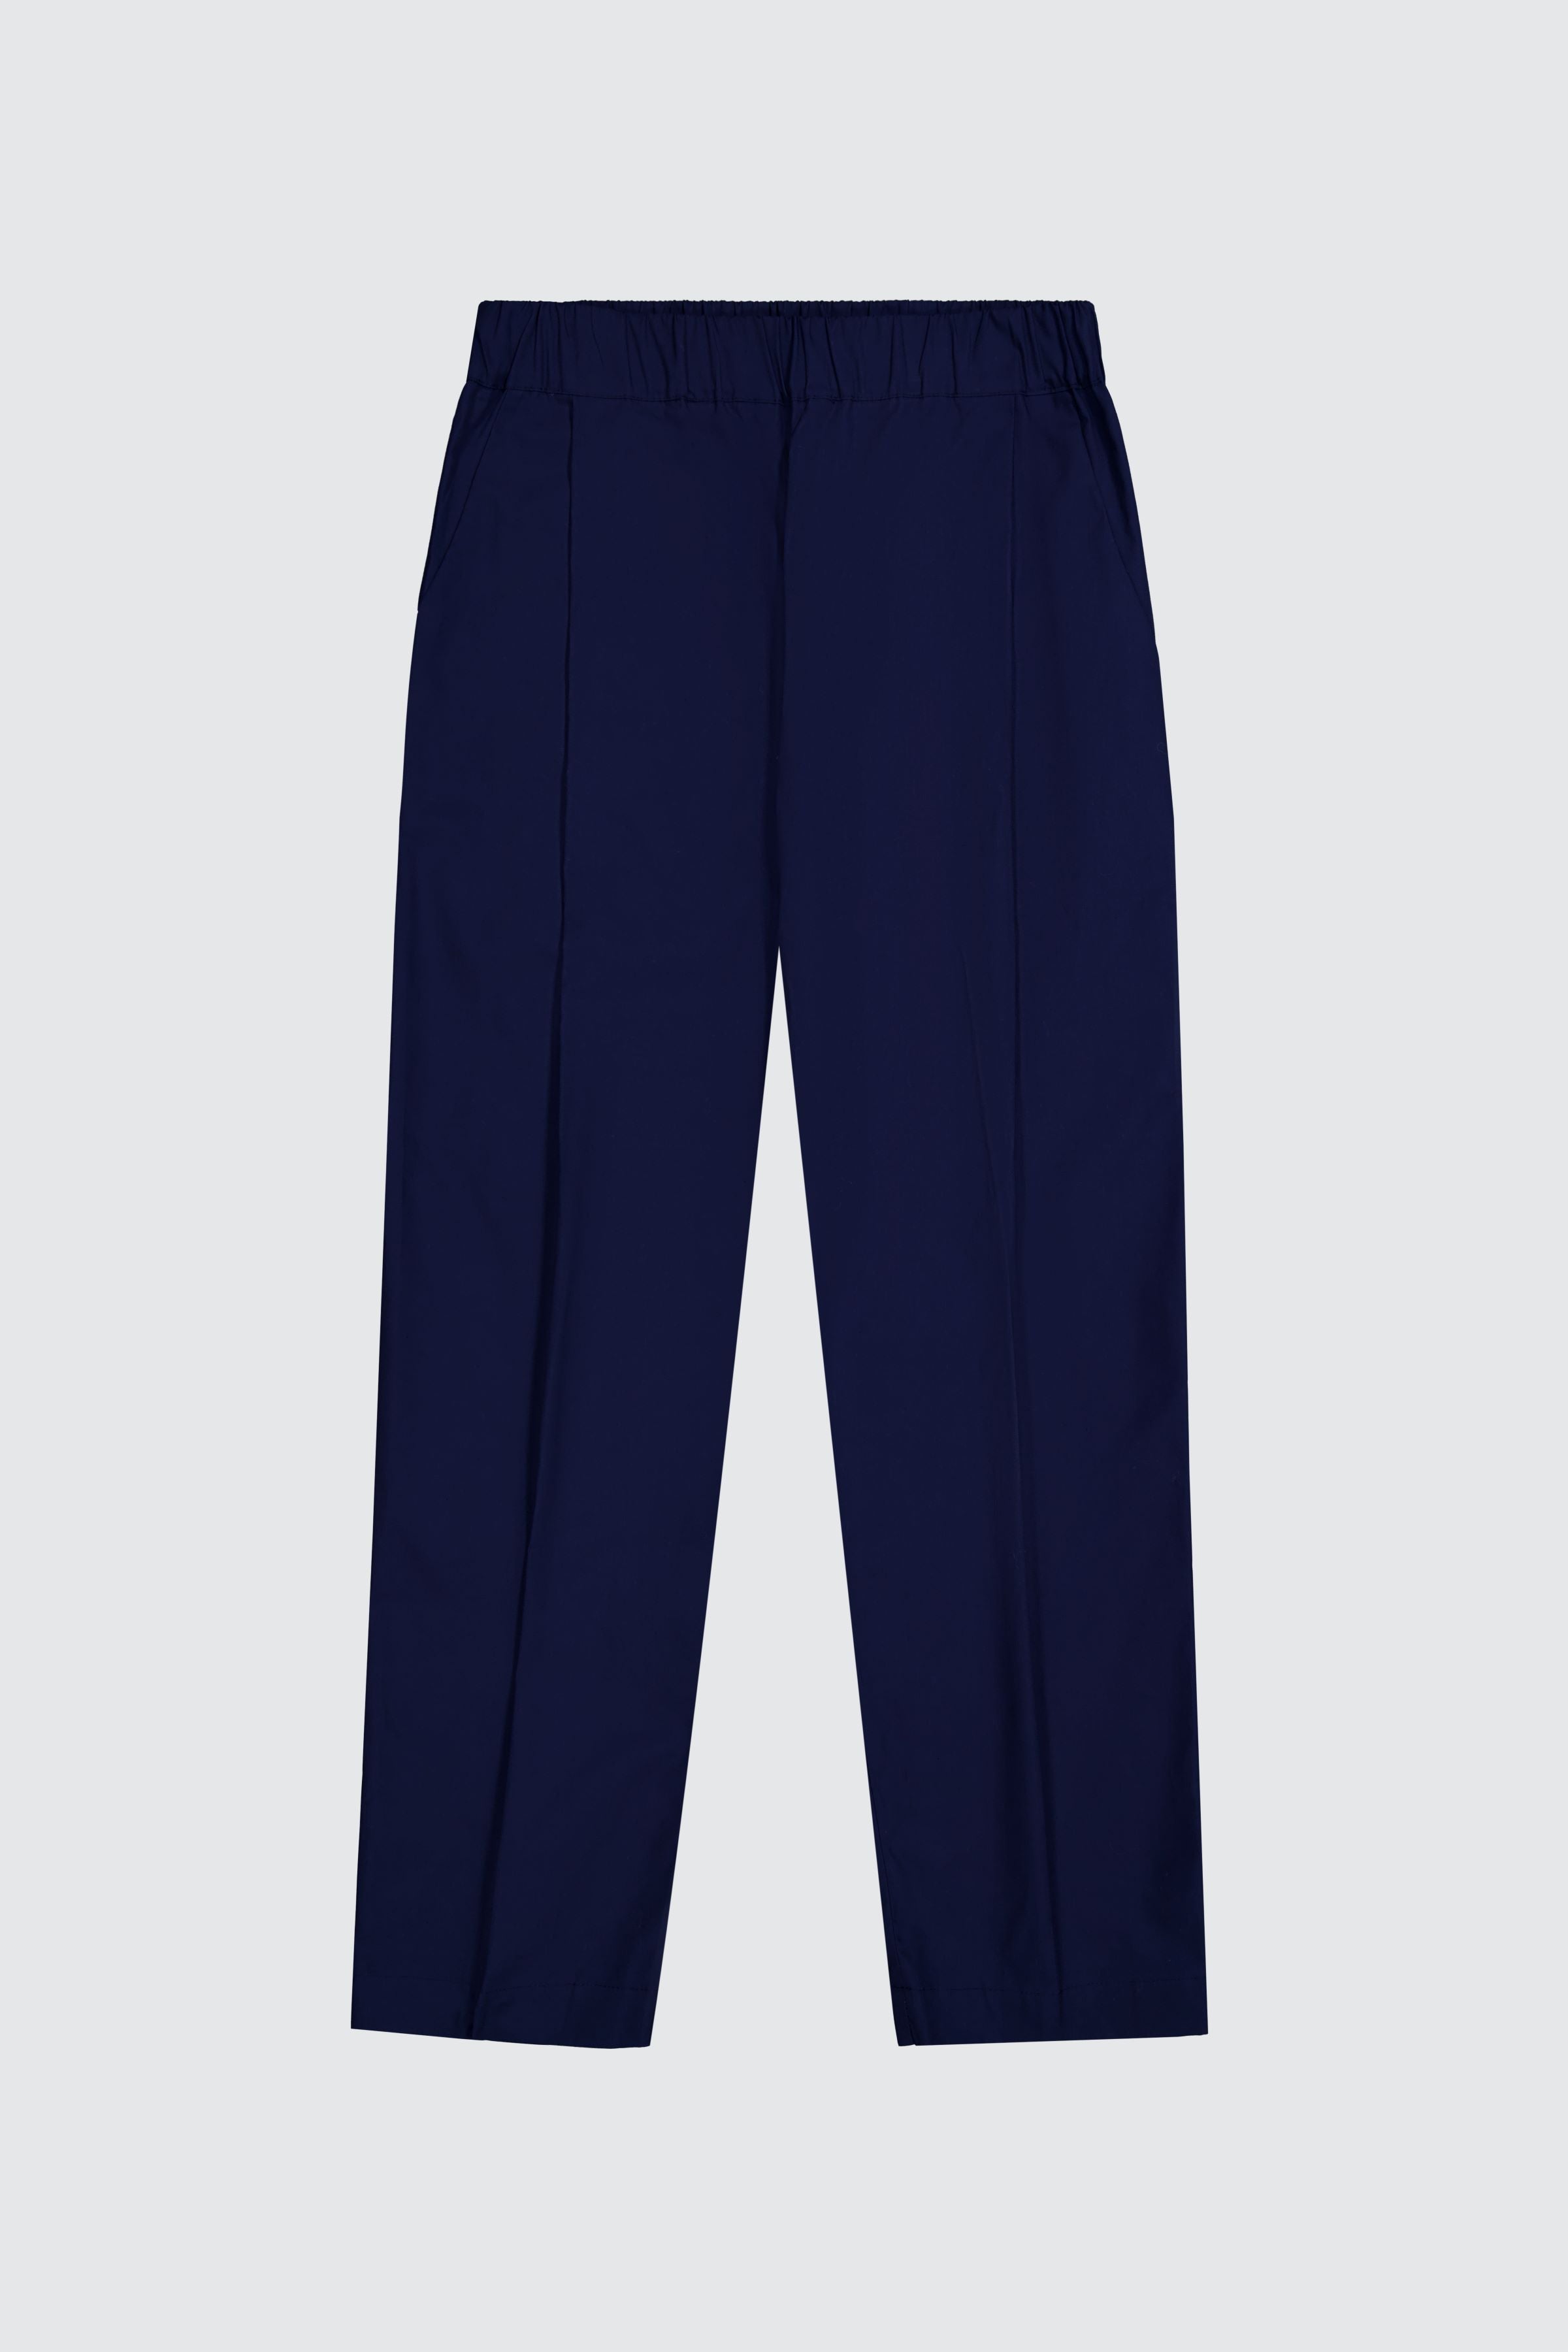 Laneus blue navy trousers with oversize fit